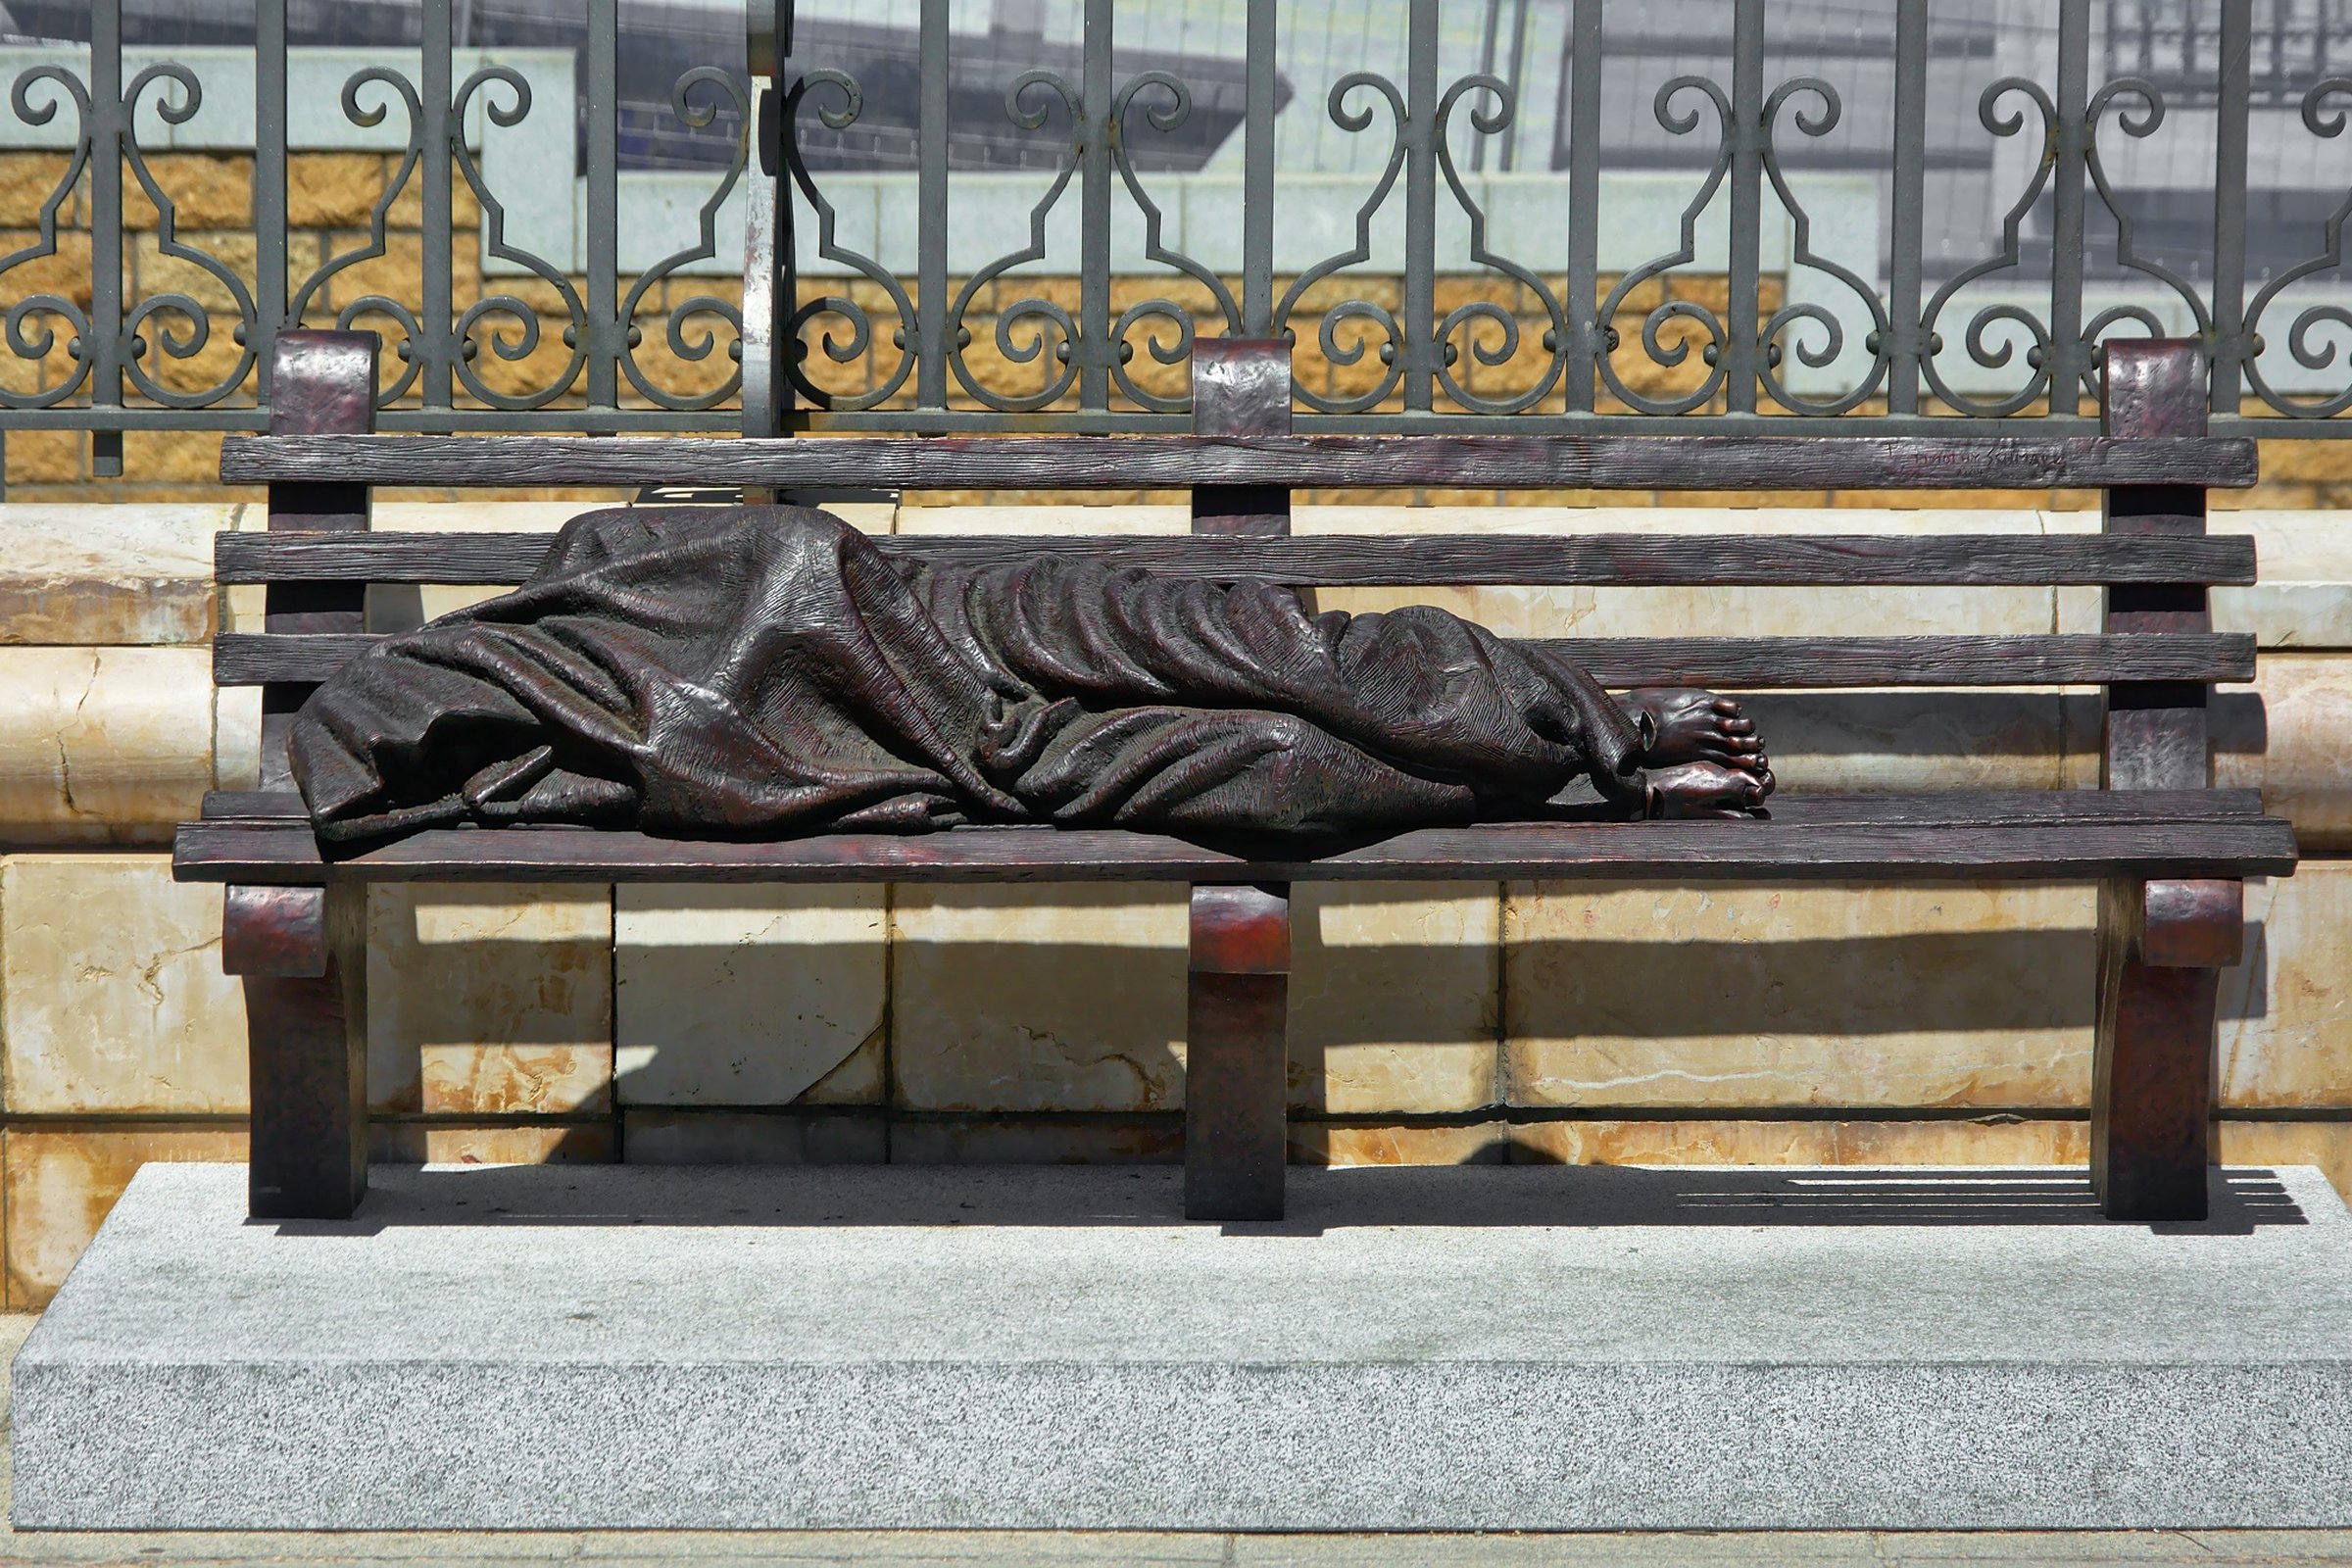 Homelessness, hunger and hope – the stations of the cross in 2019